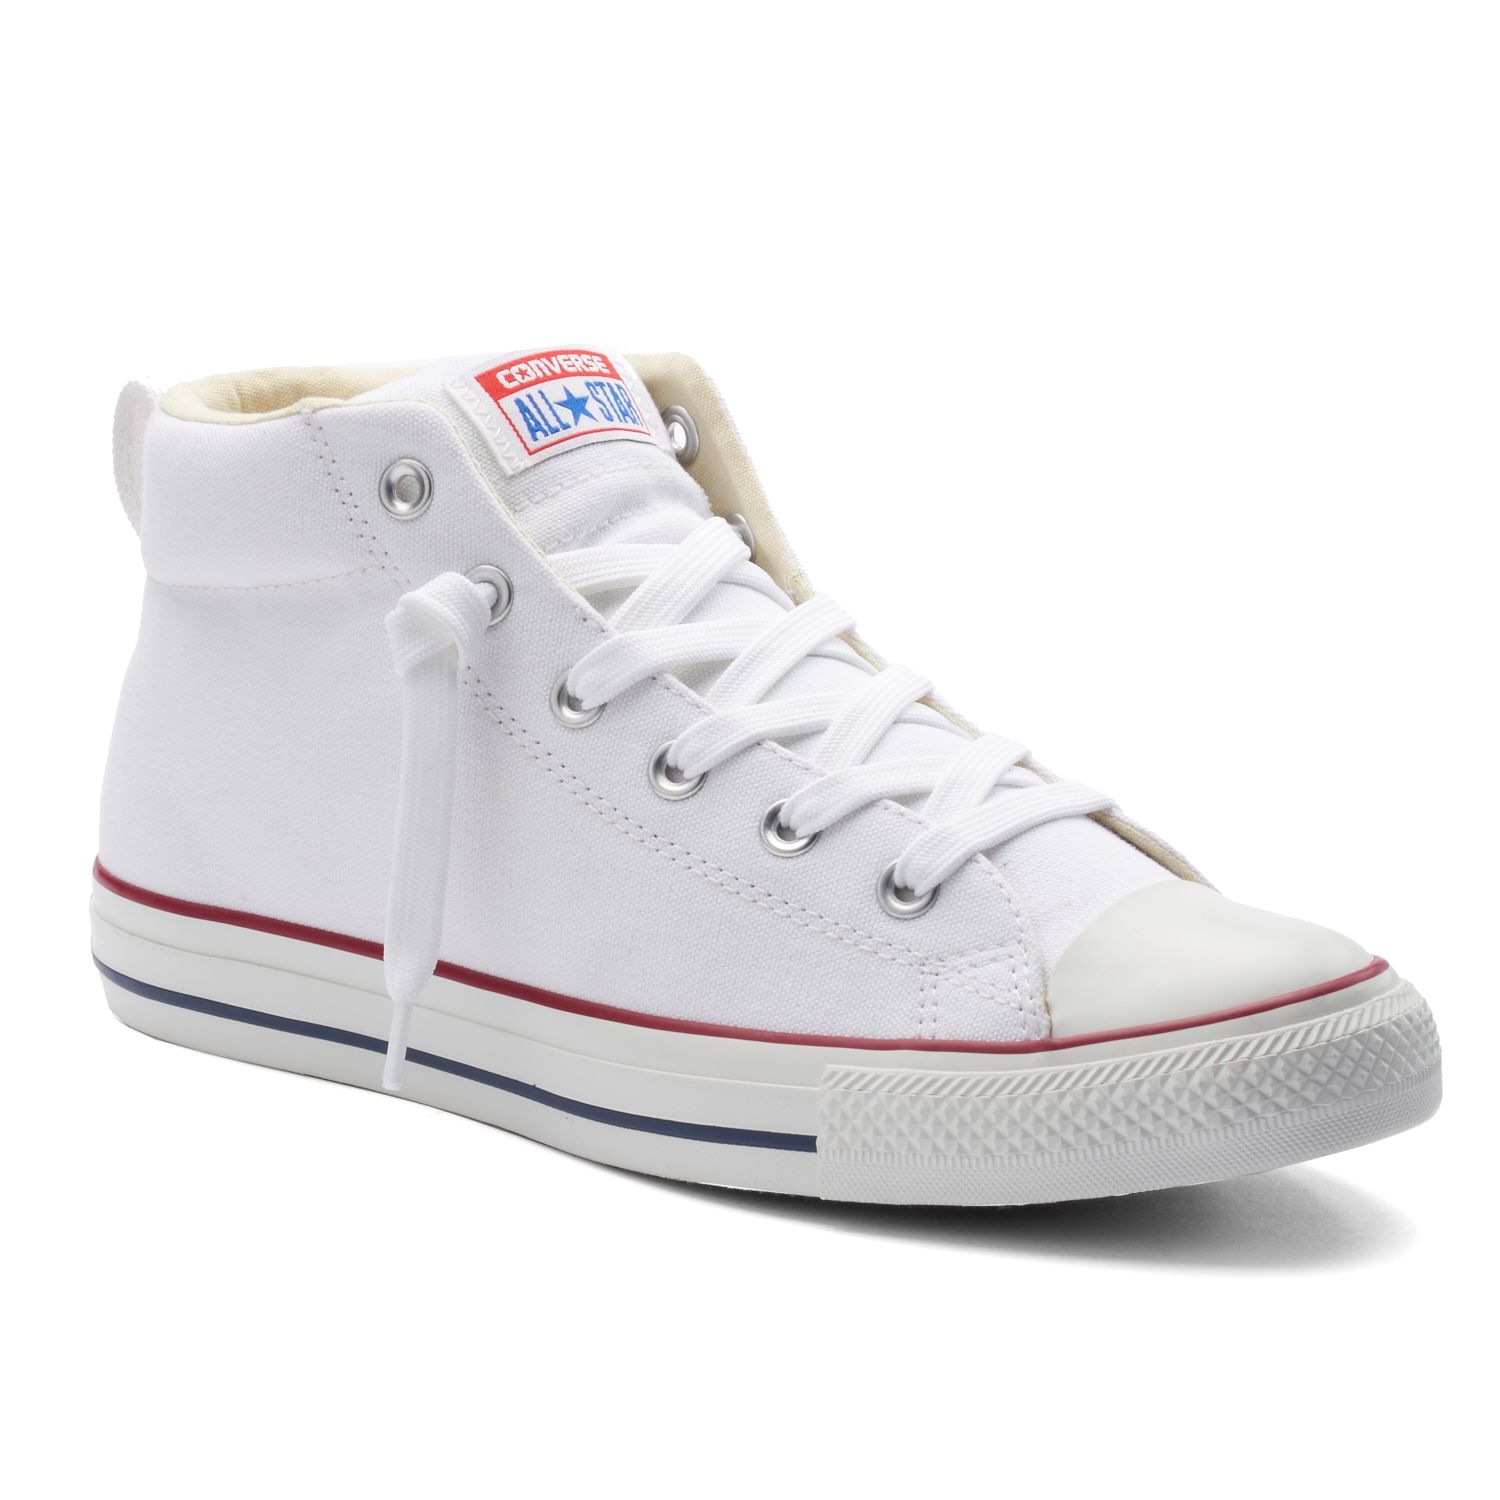 Adult Converse All Star Chuck Taylor Street Mid-Top Sneakers